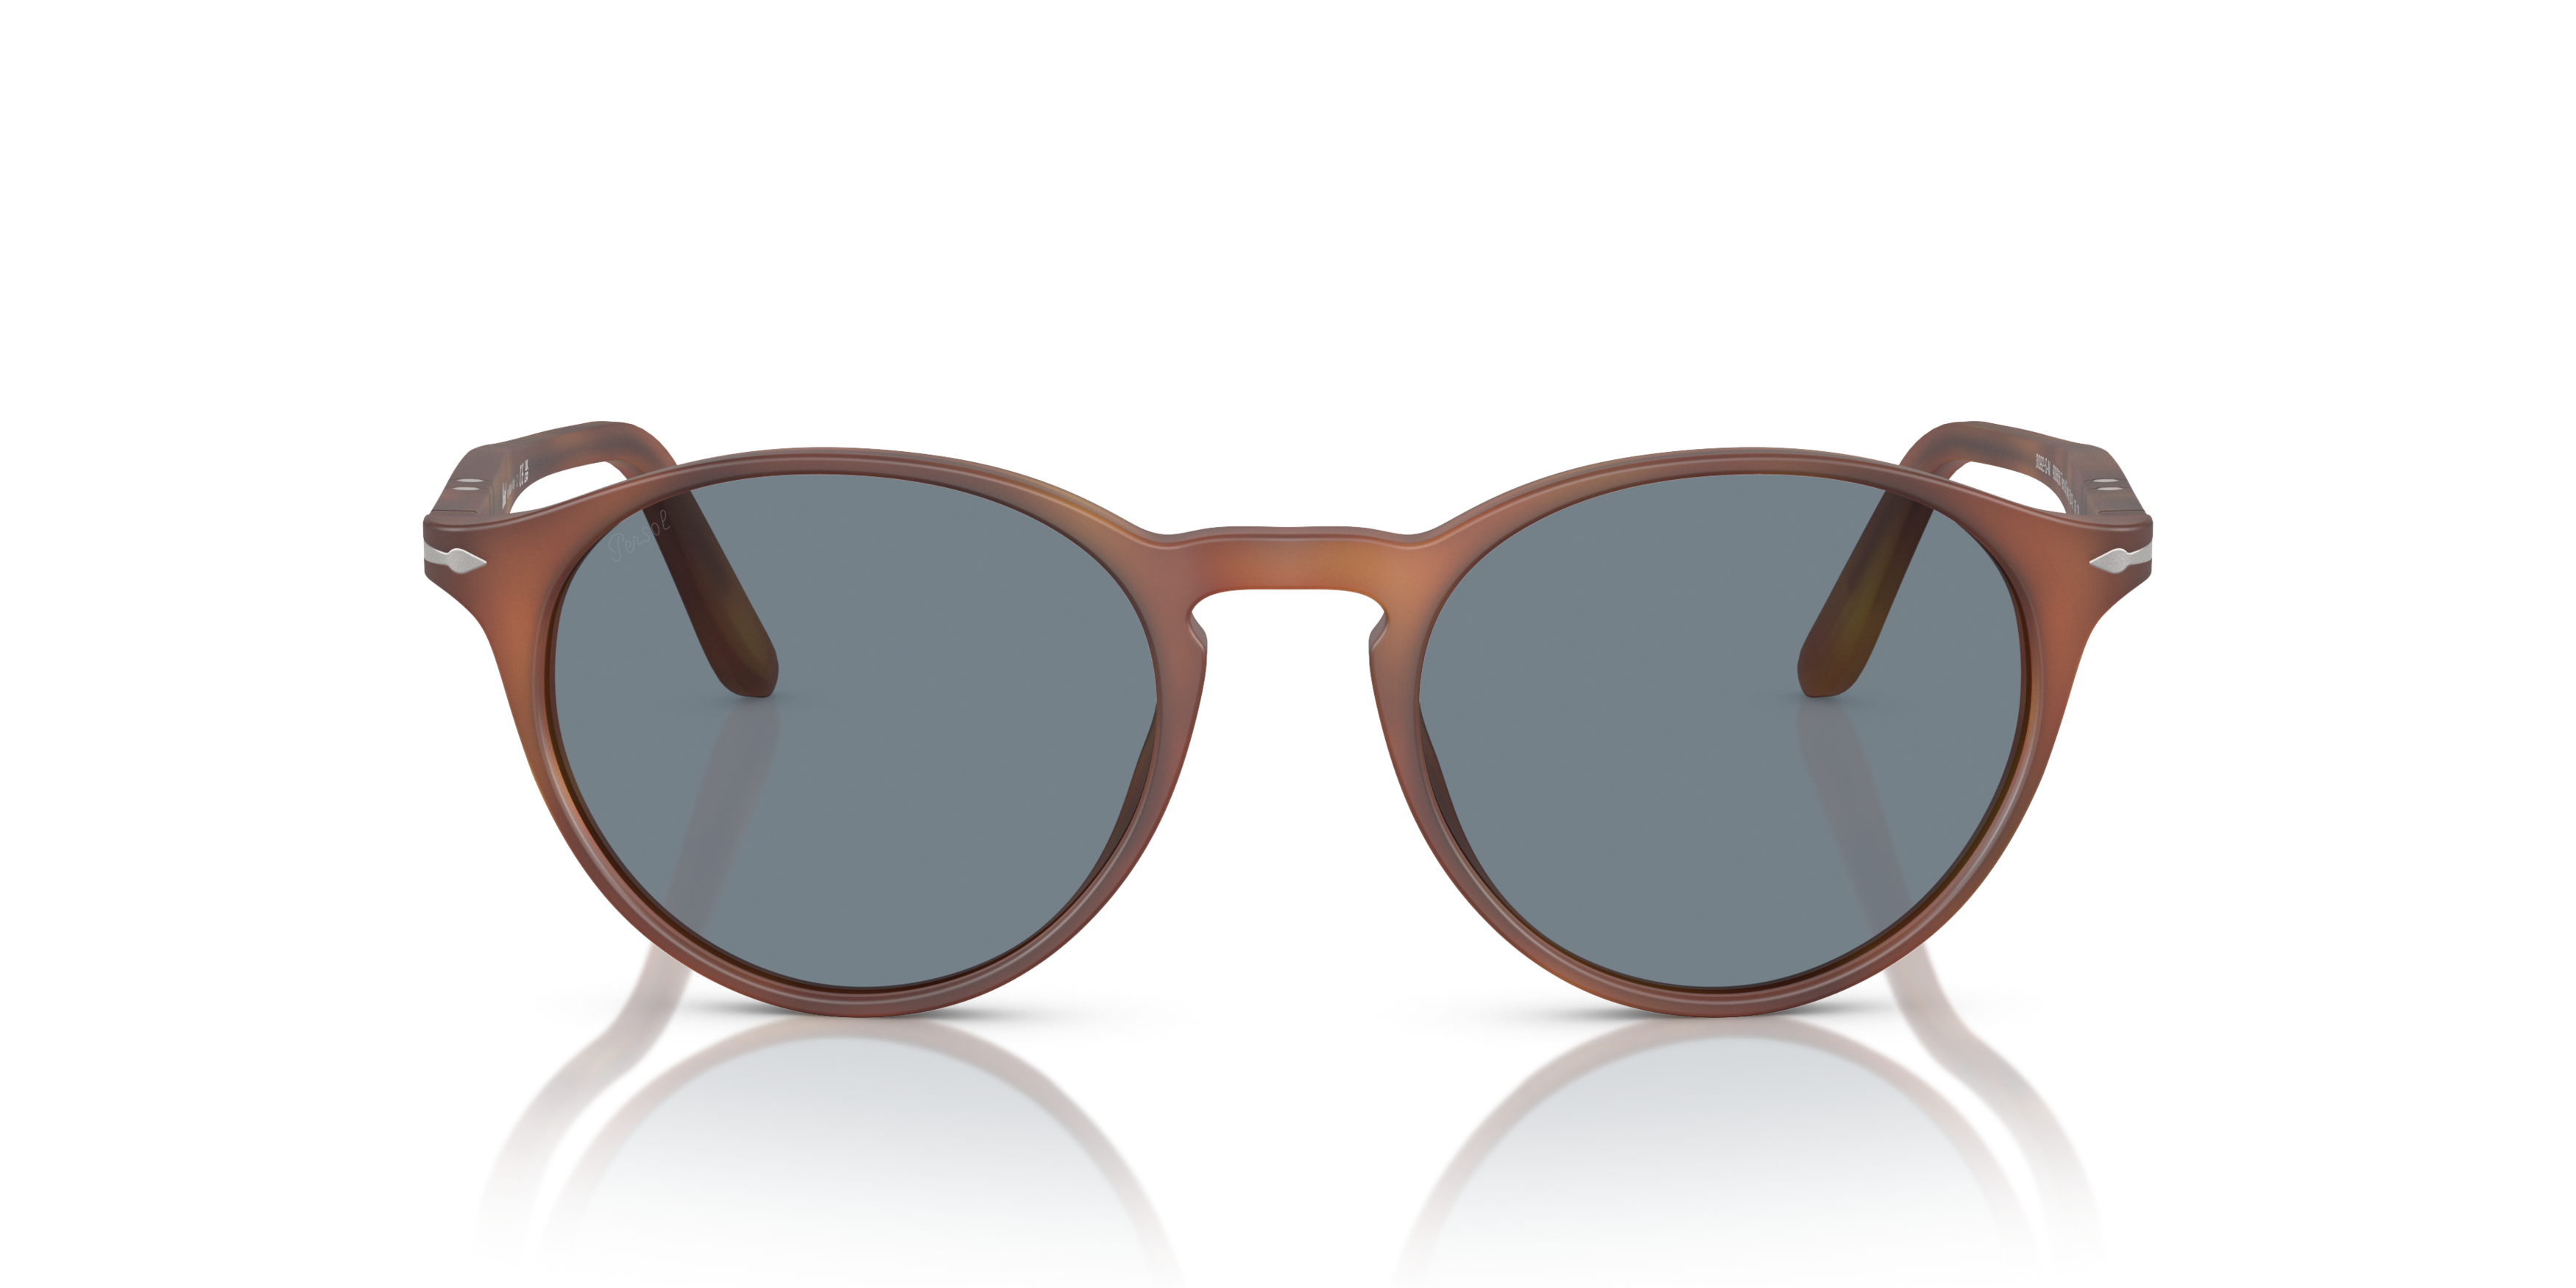 [products.image.front] PERSOL PO3092SM 900656